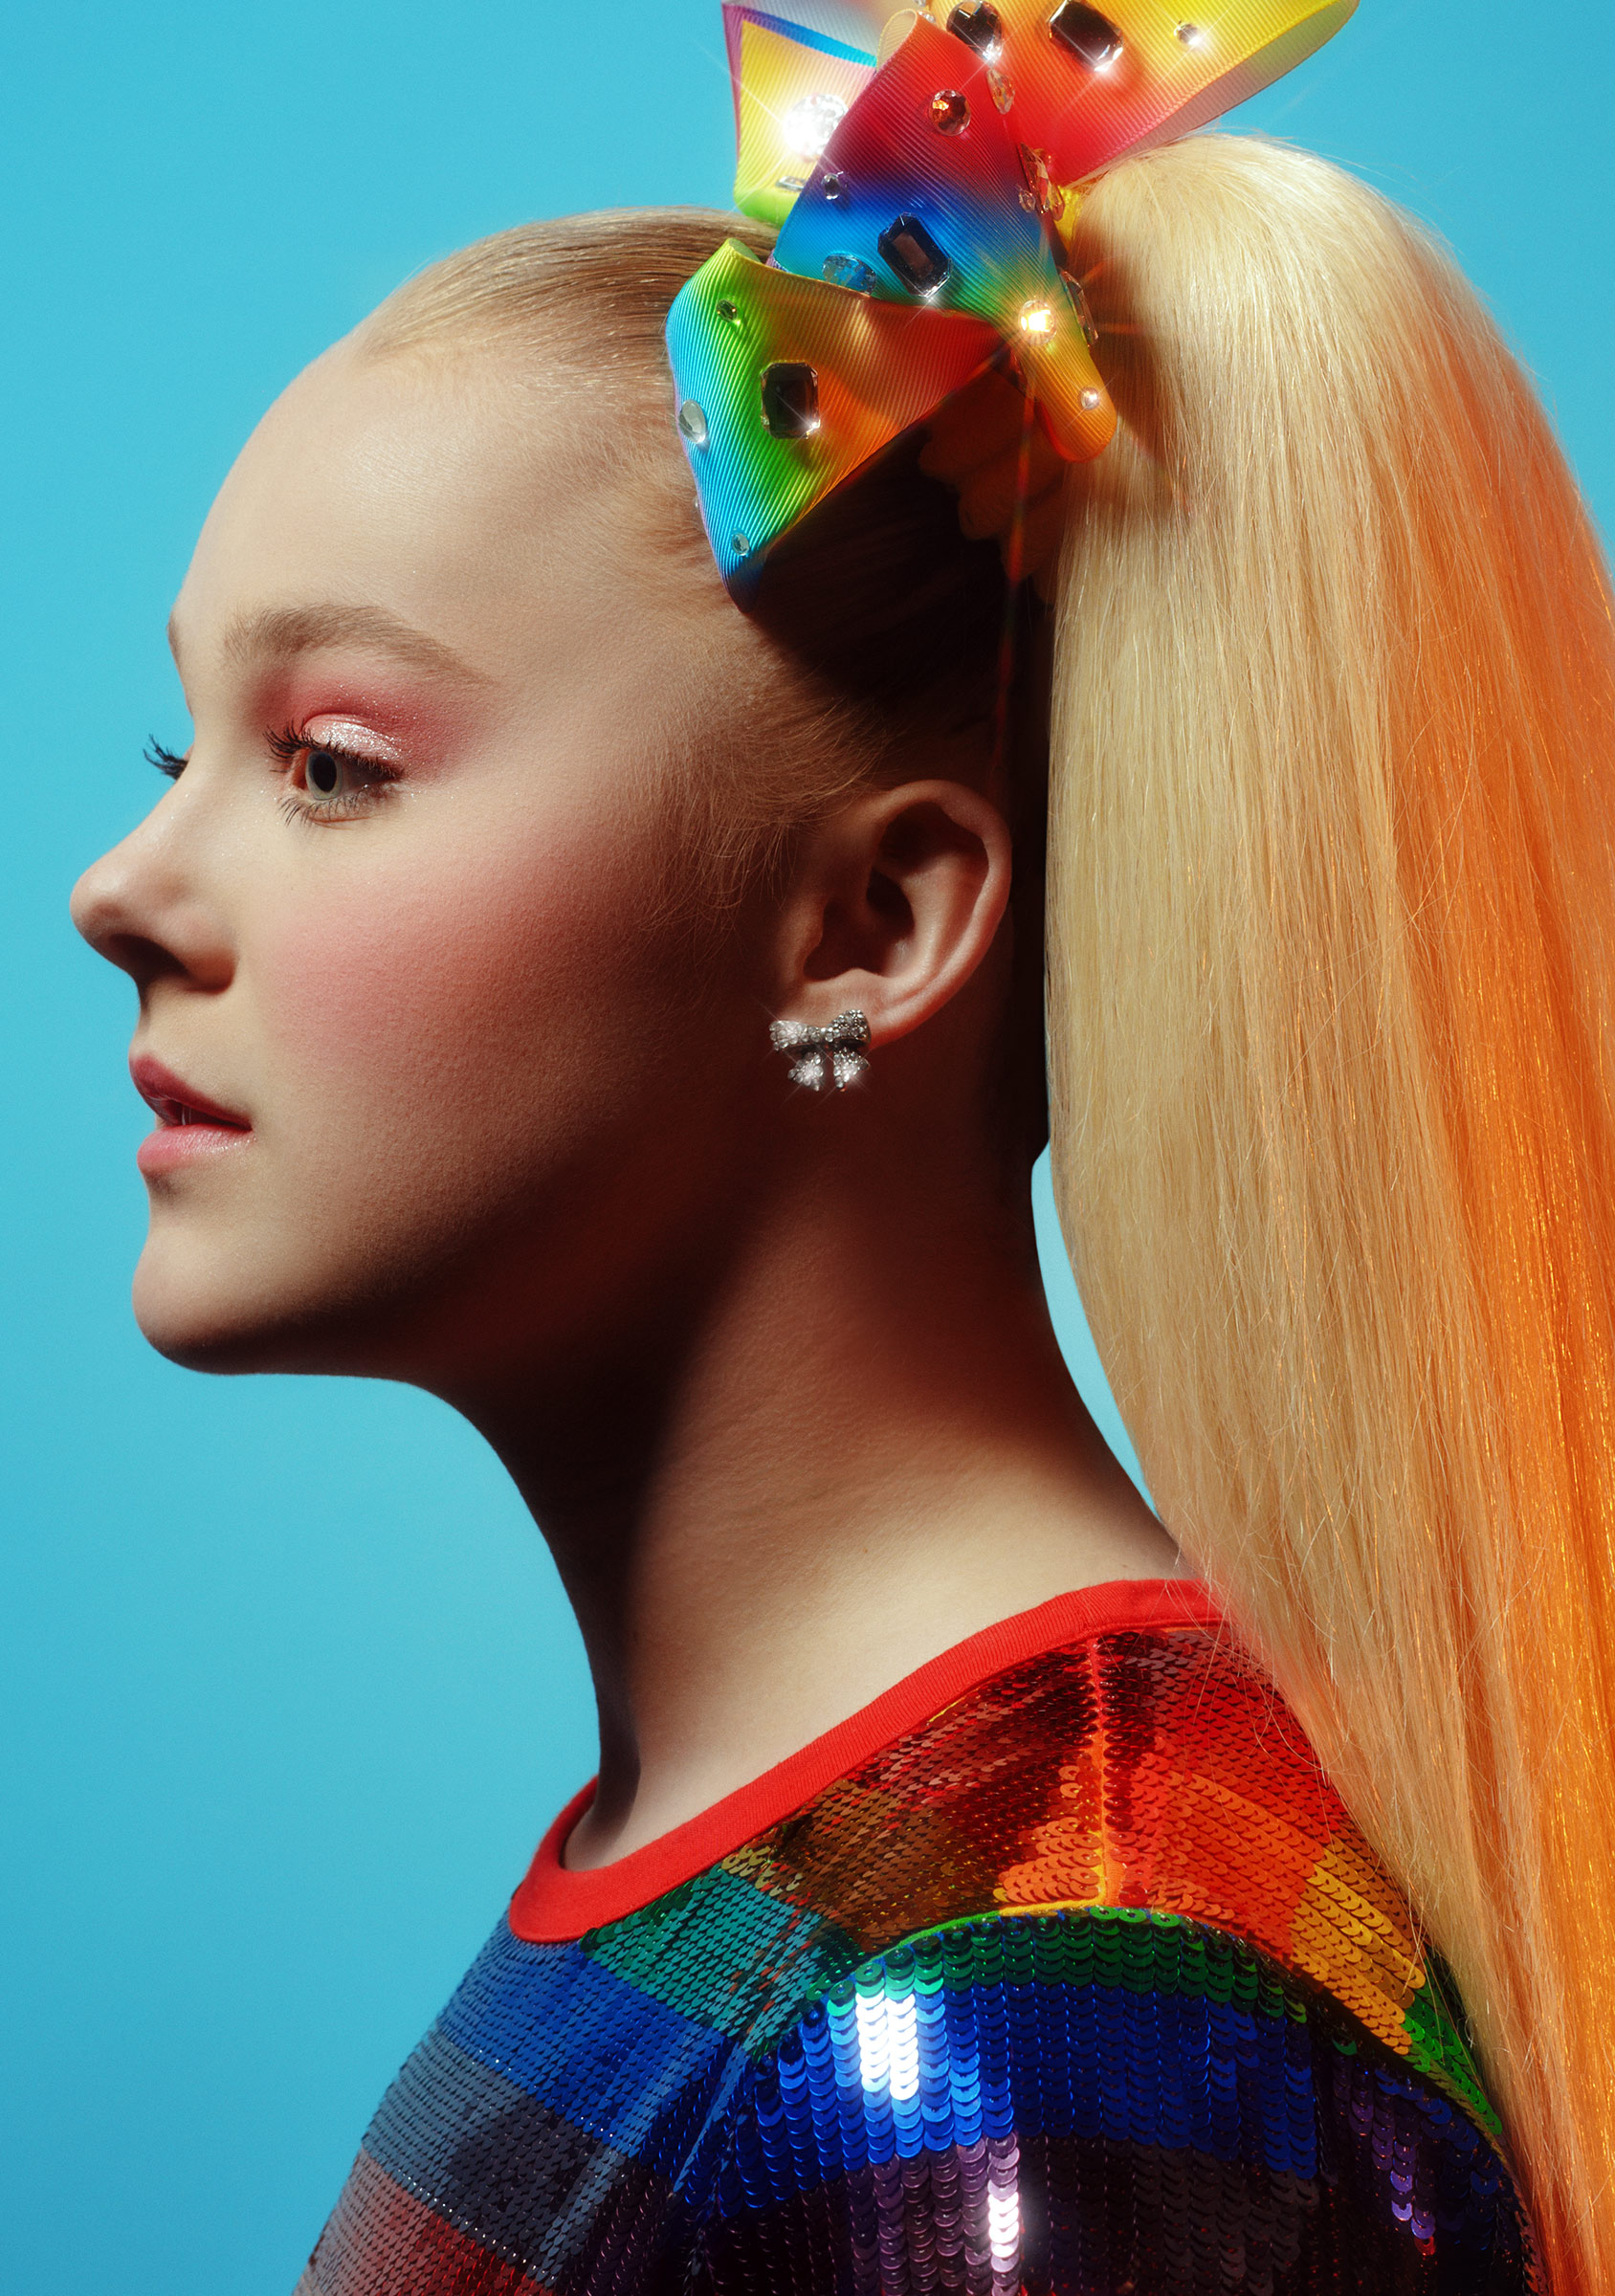 How Child Star Jojo Siwa Built Her Sparkly Empire Time